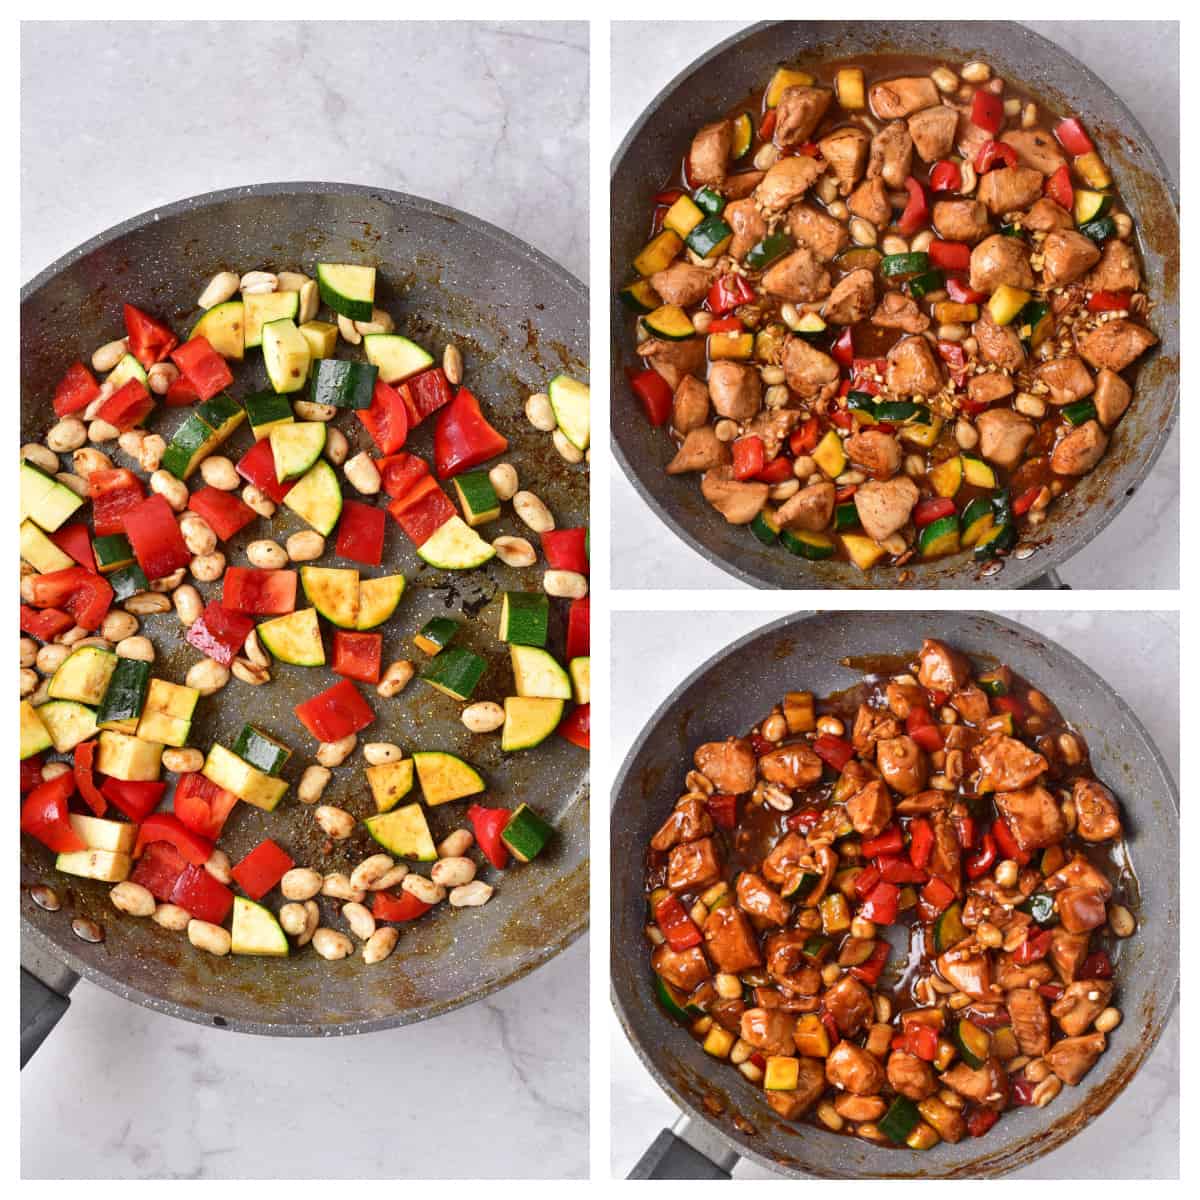 Stages of cooking the vegetables and chicken in the kung pao sauce.